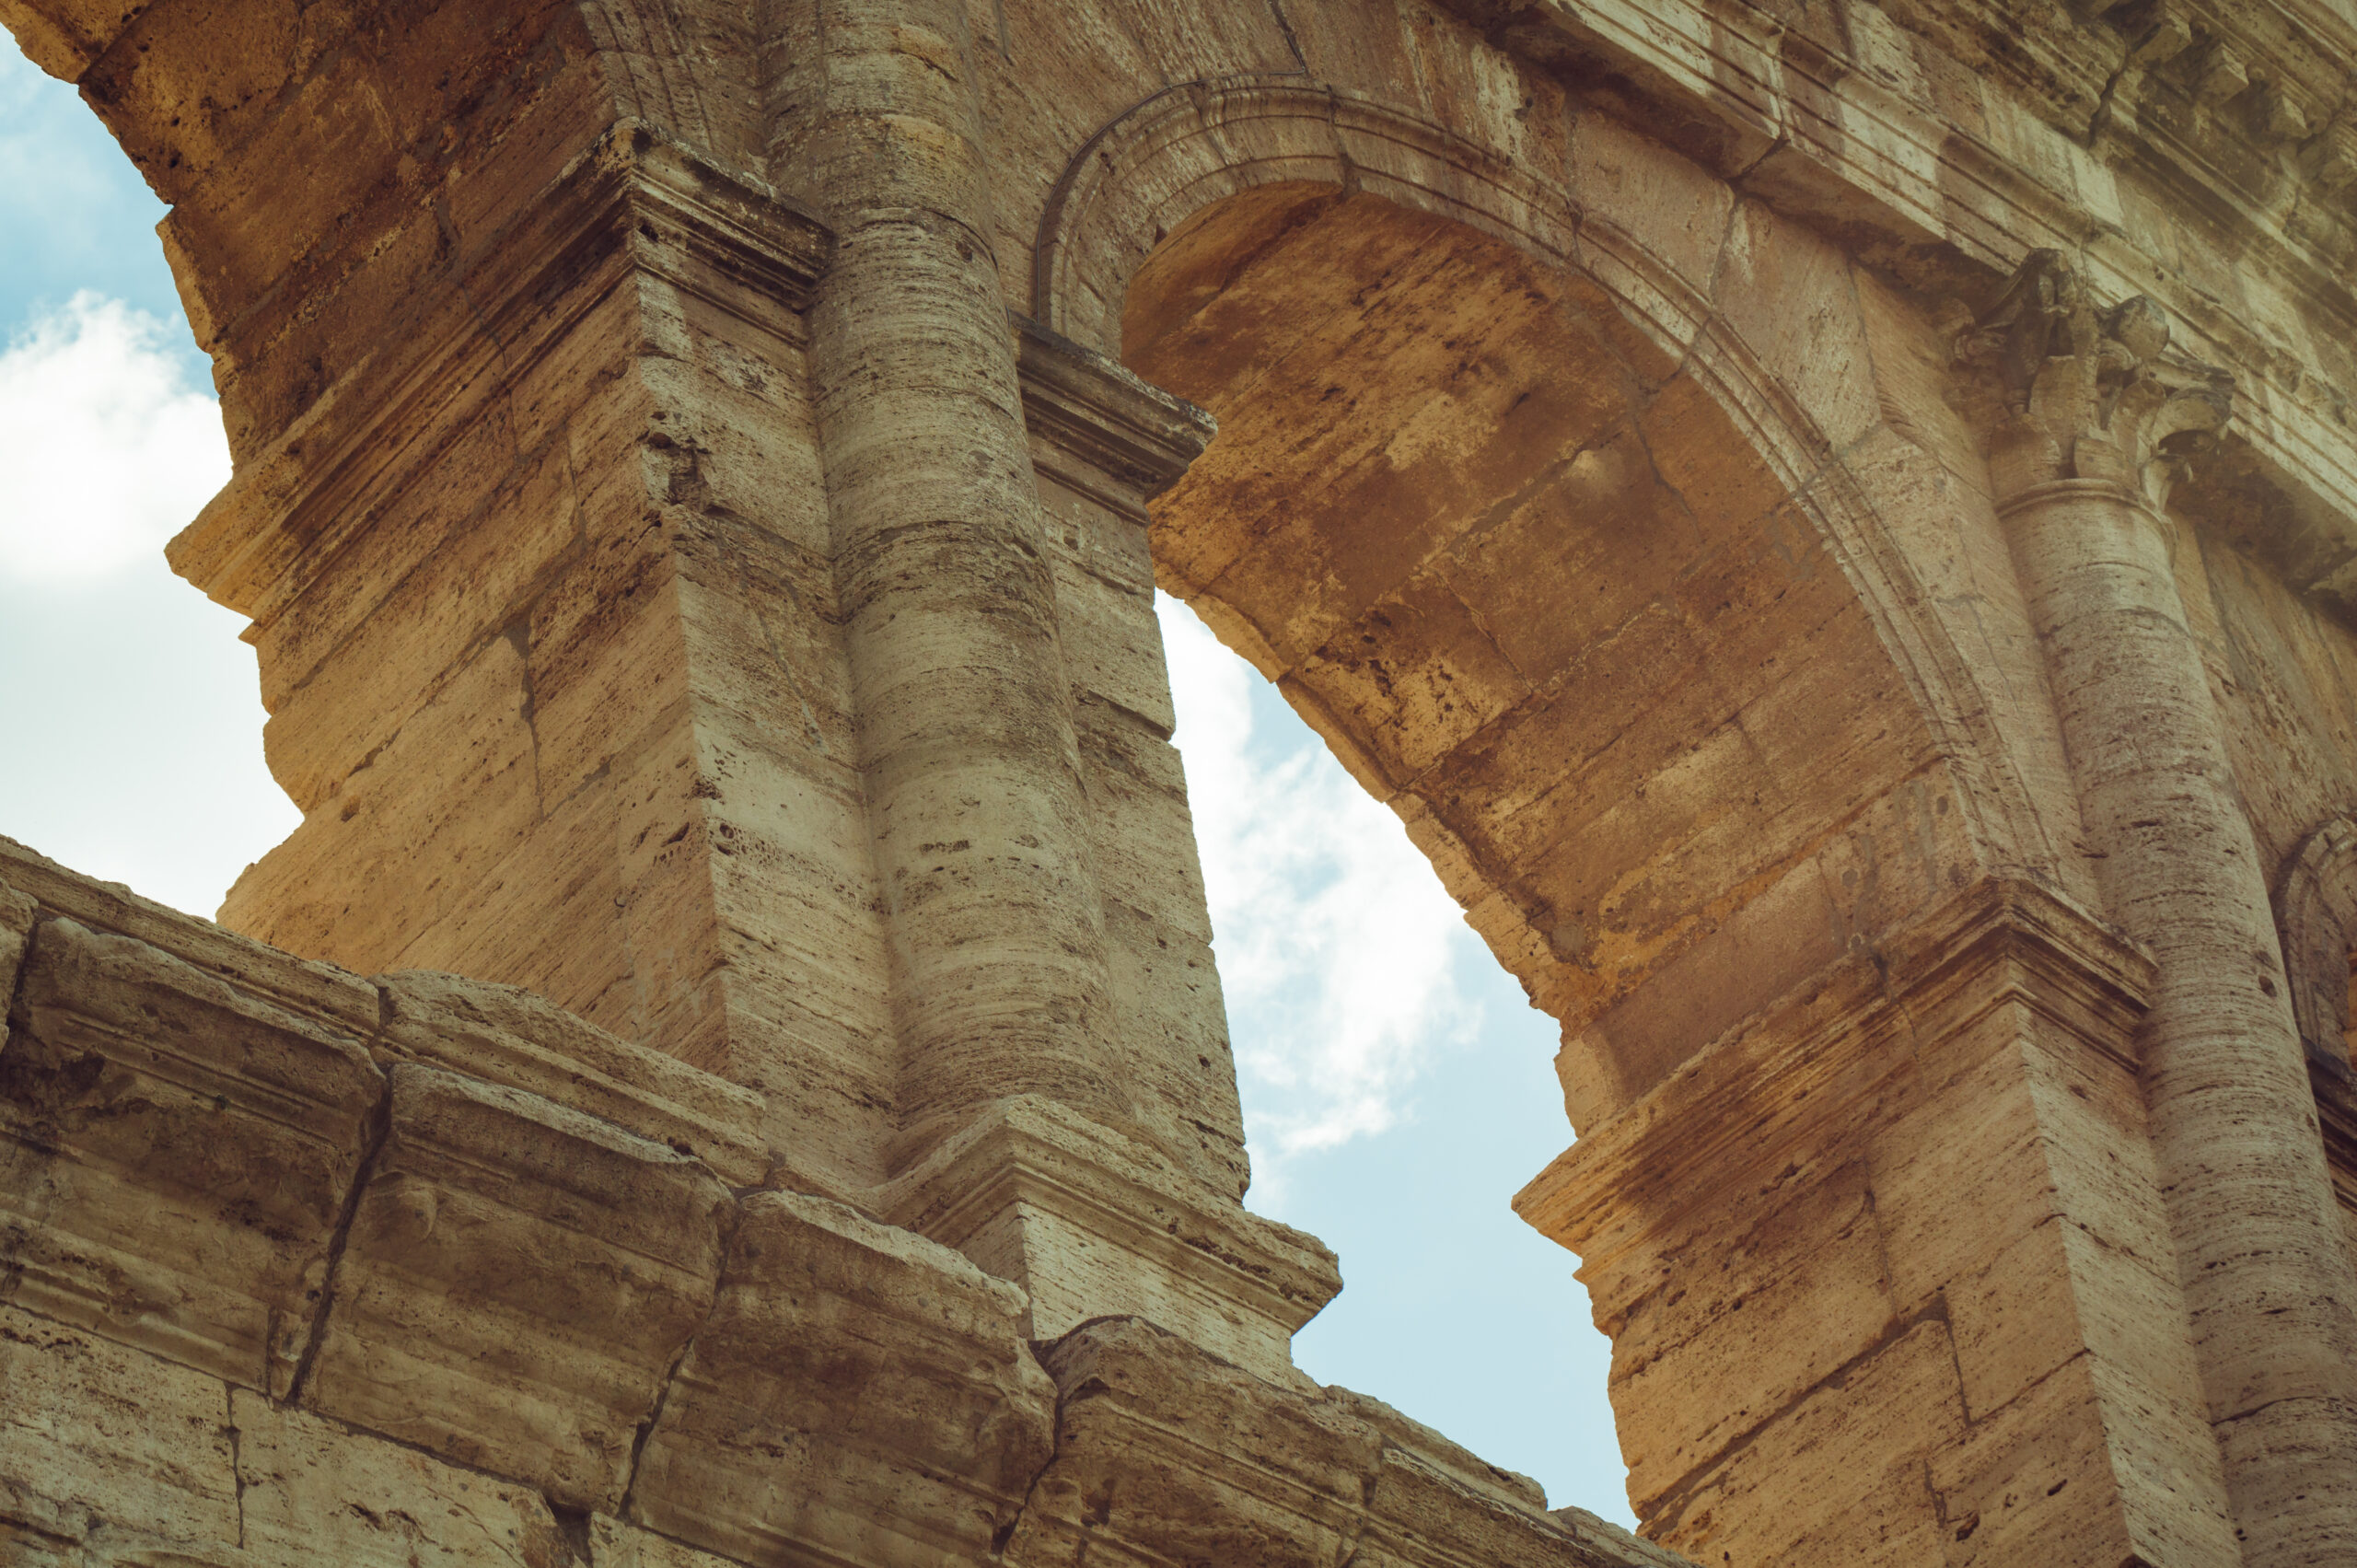 Close-up of arches of Coliseum, Roma, Italy.